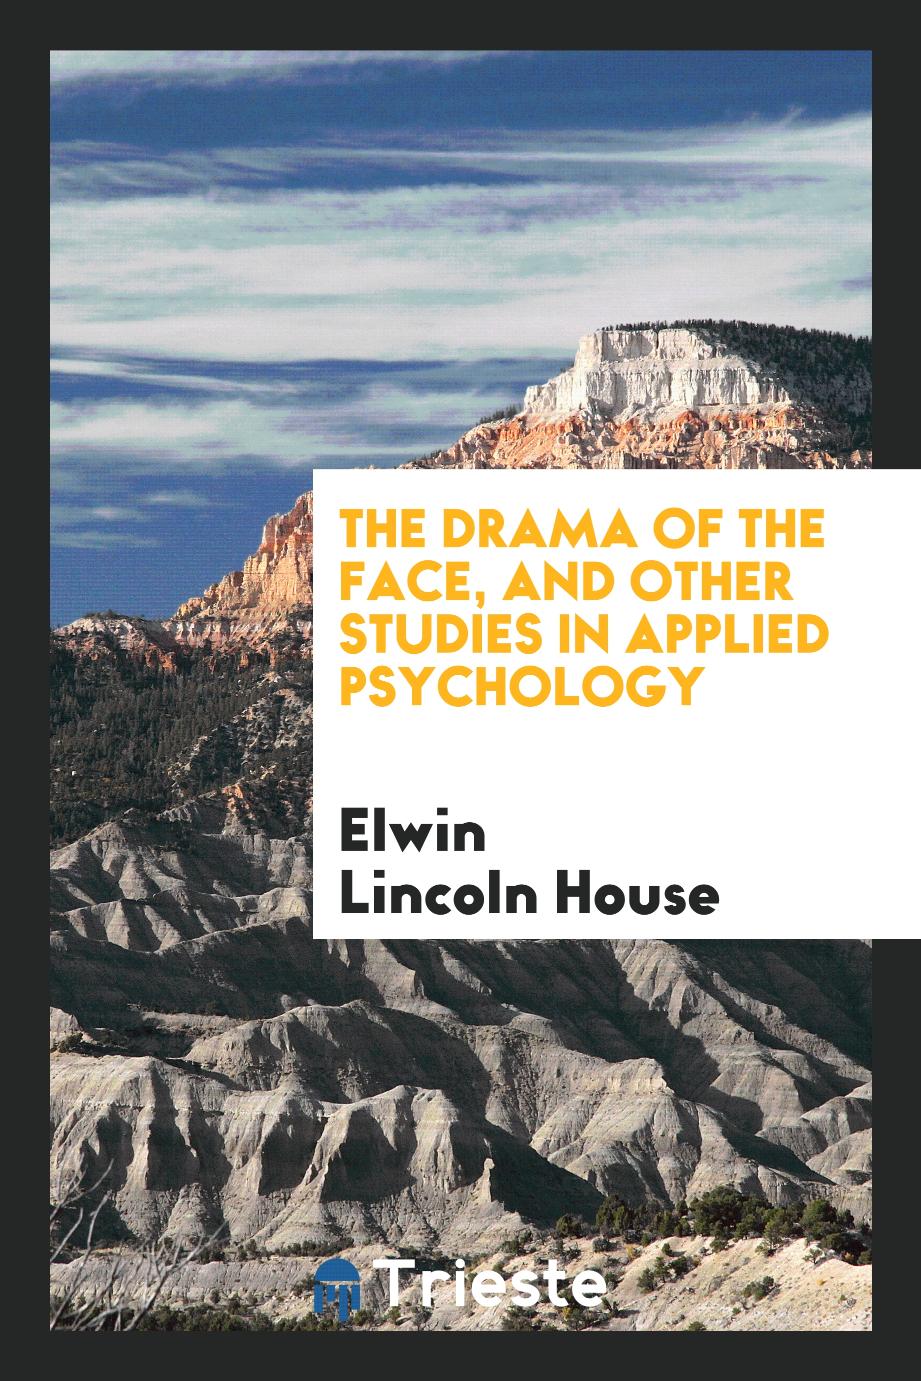 The drama of the face, and other studies in applied psychology